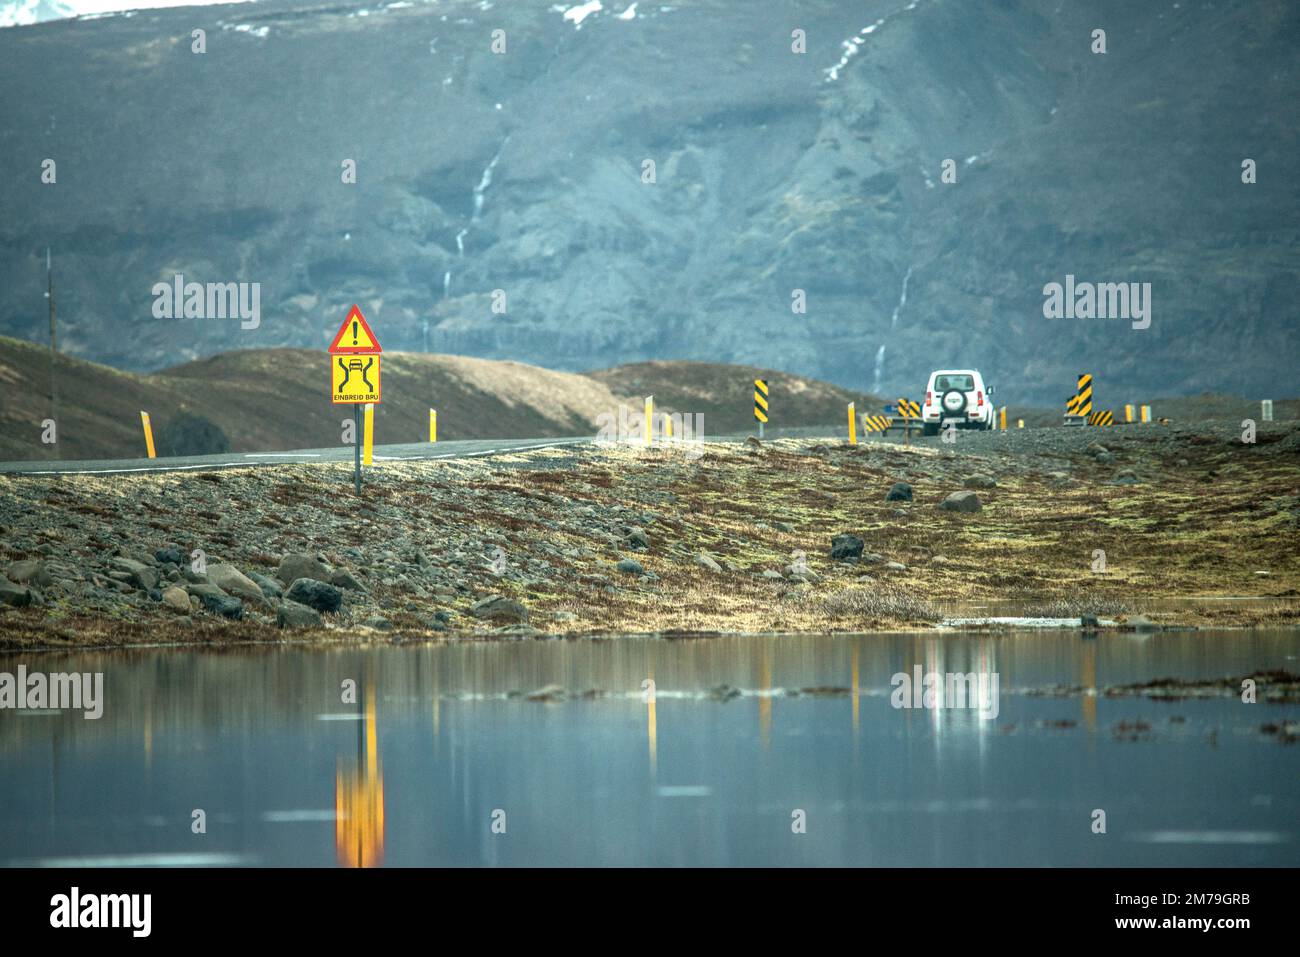 A Suzuki Jimny drives across the ring road in Iceland, with reflection and glacier in the background Stock Photo